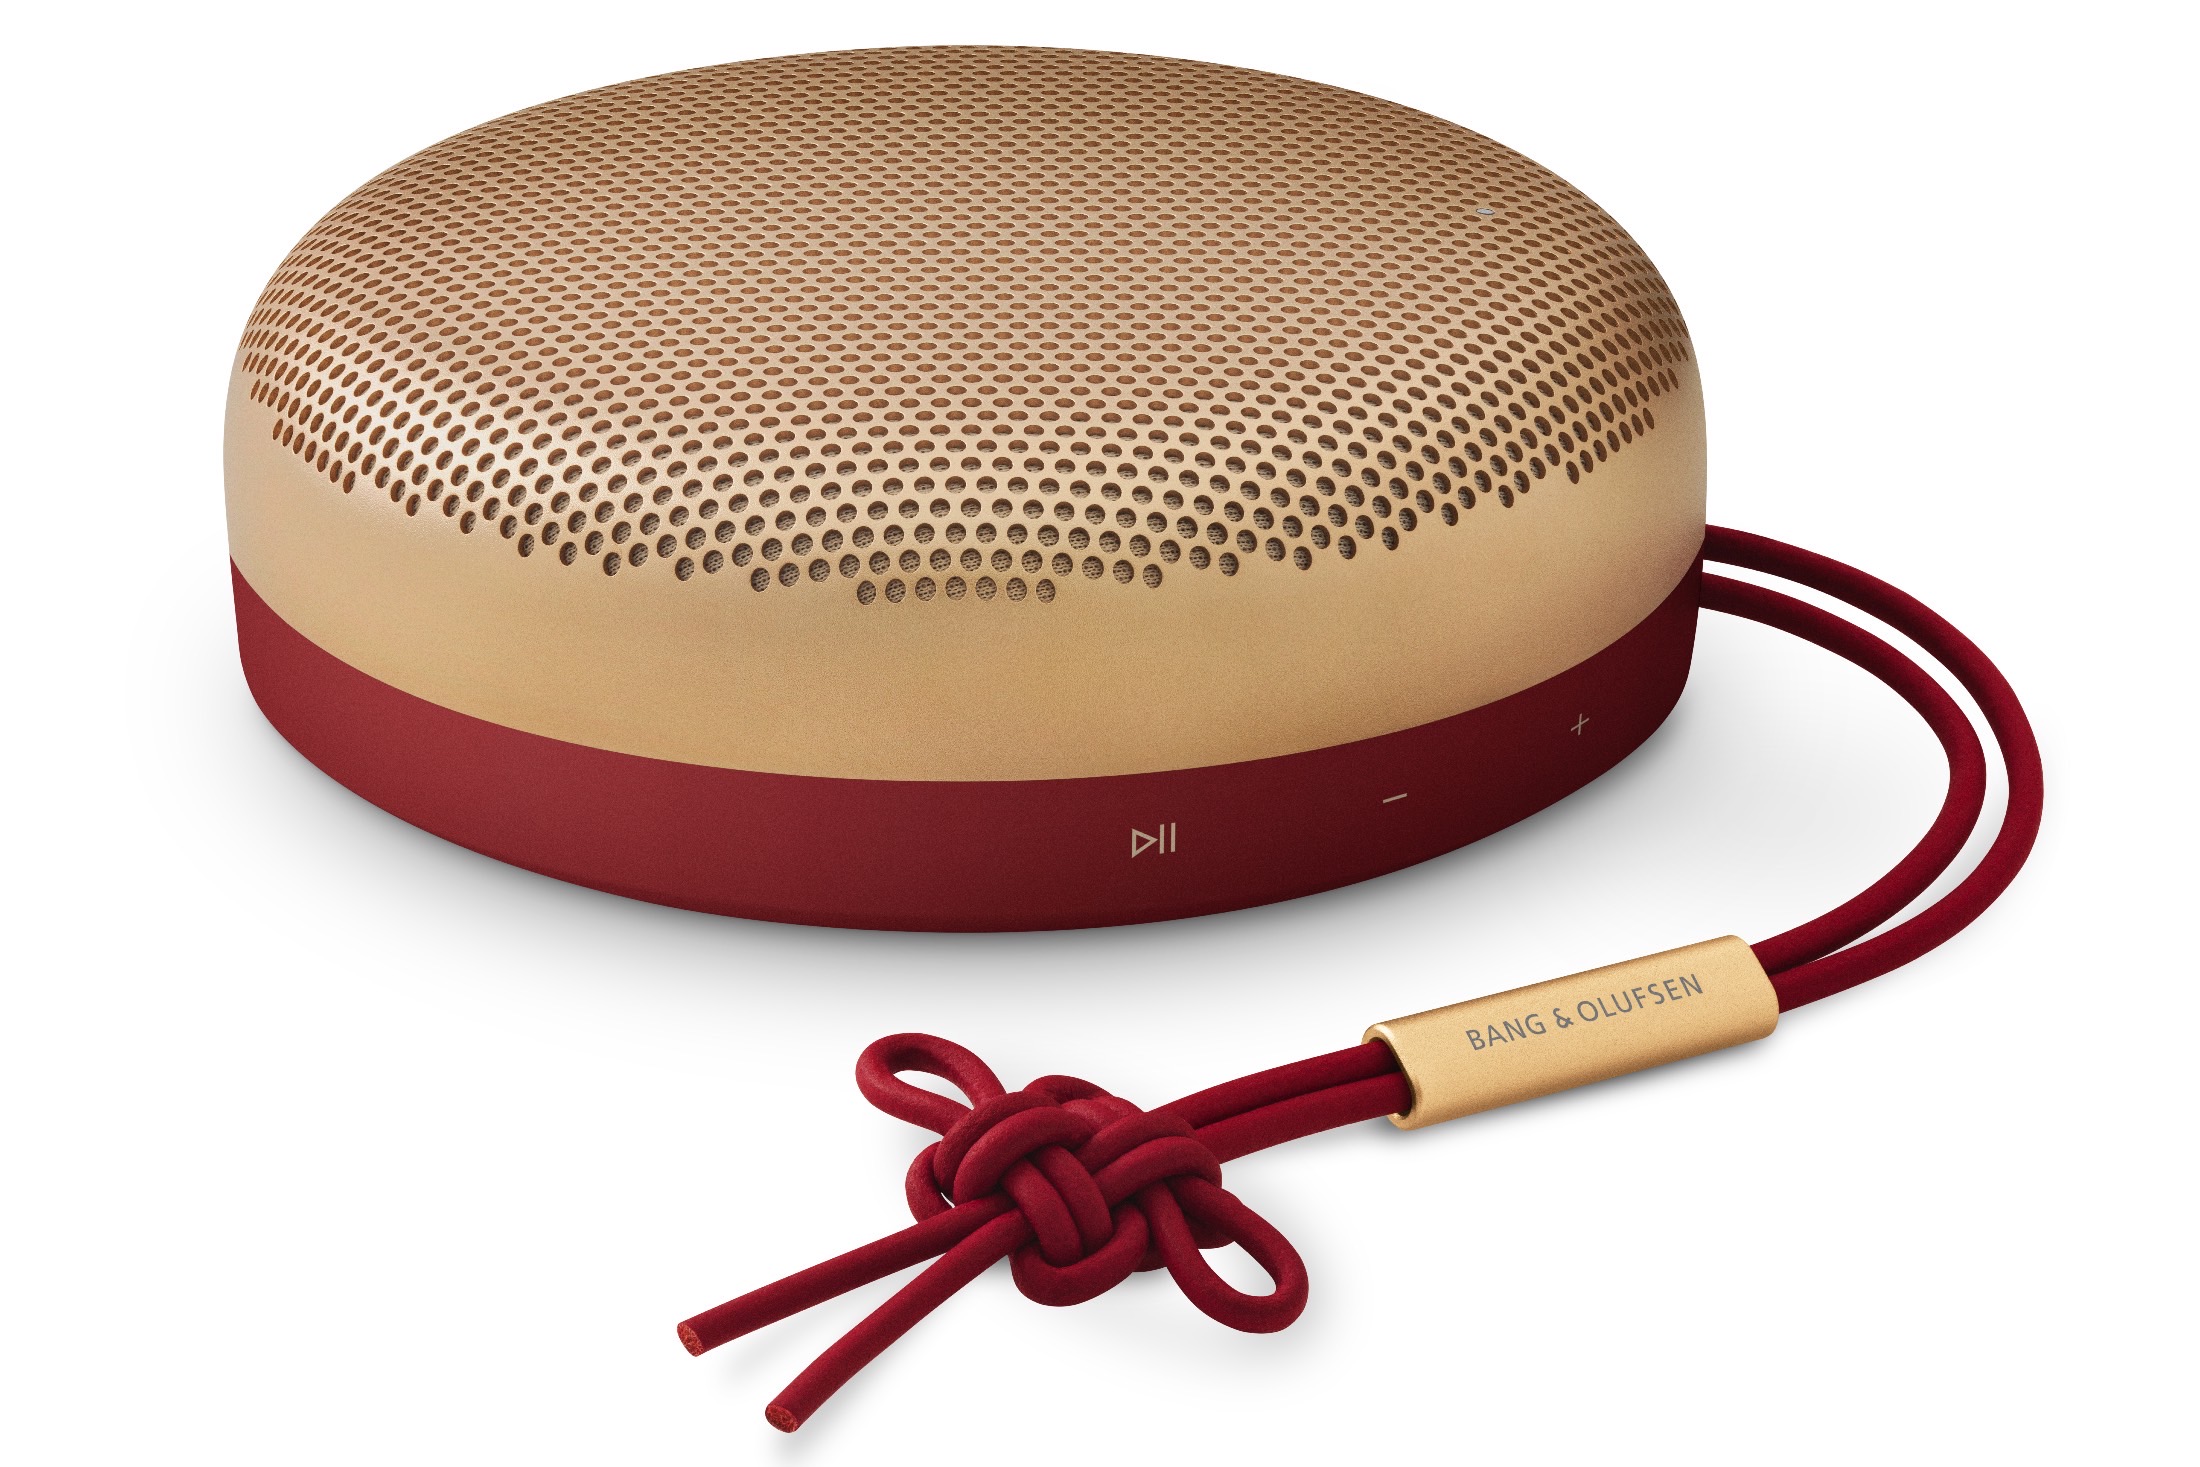 Bang & Olufsen's latest lunchbox-shaped speaker has a built-in Qi